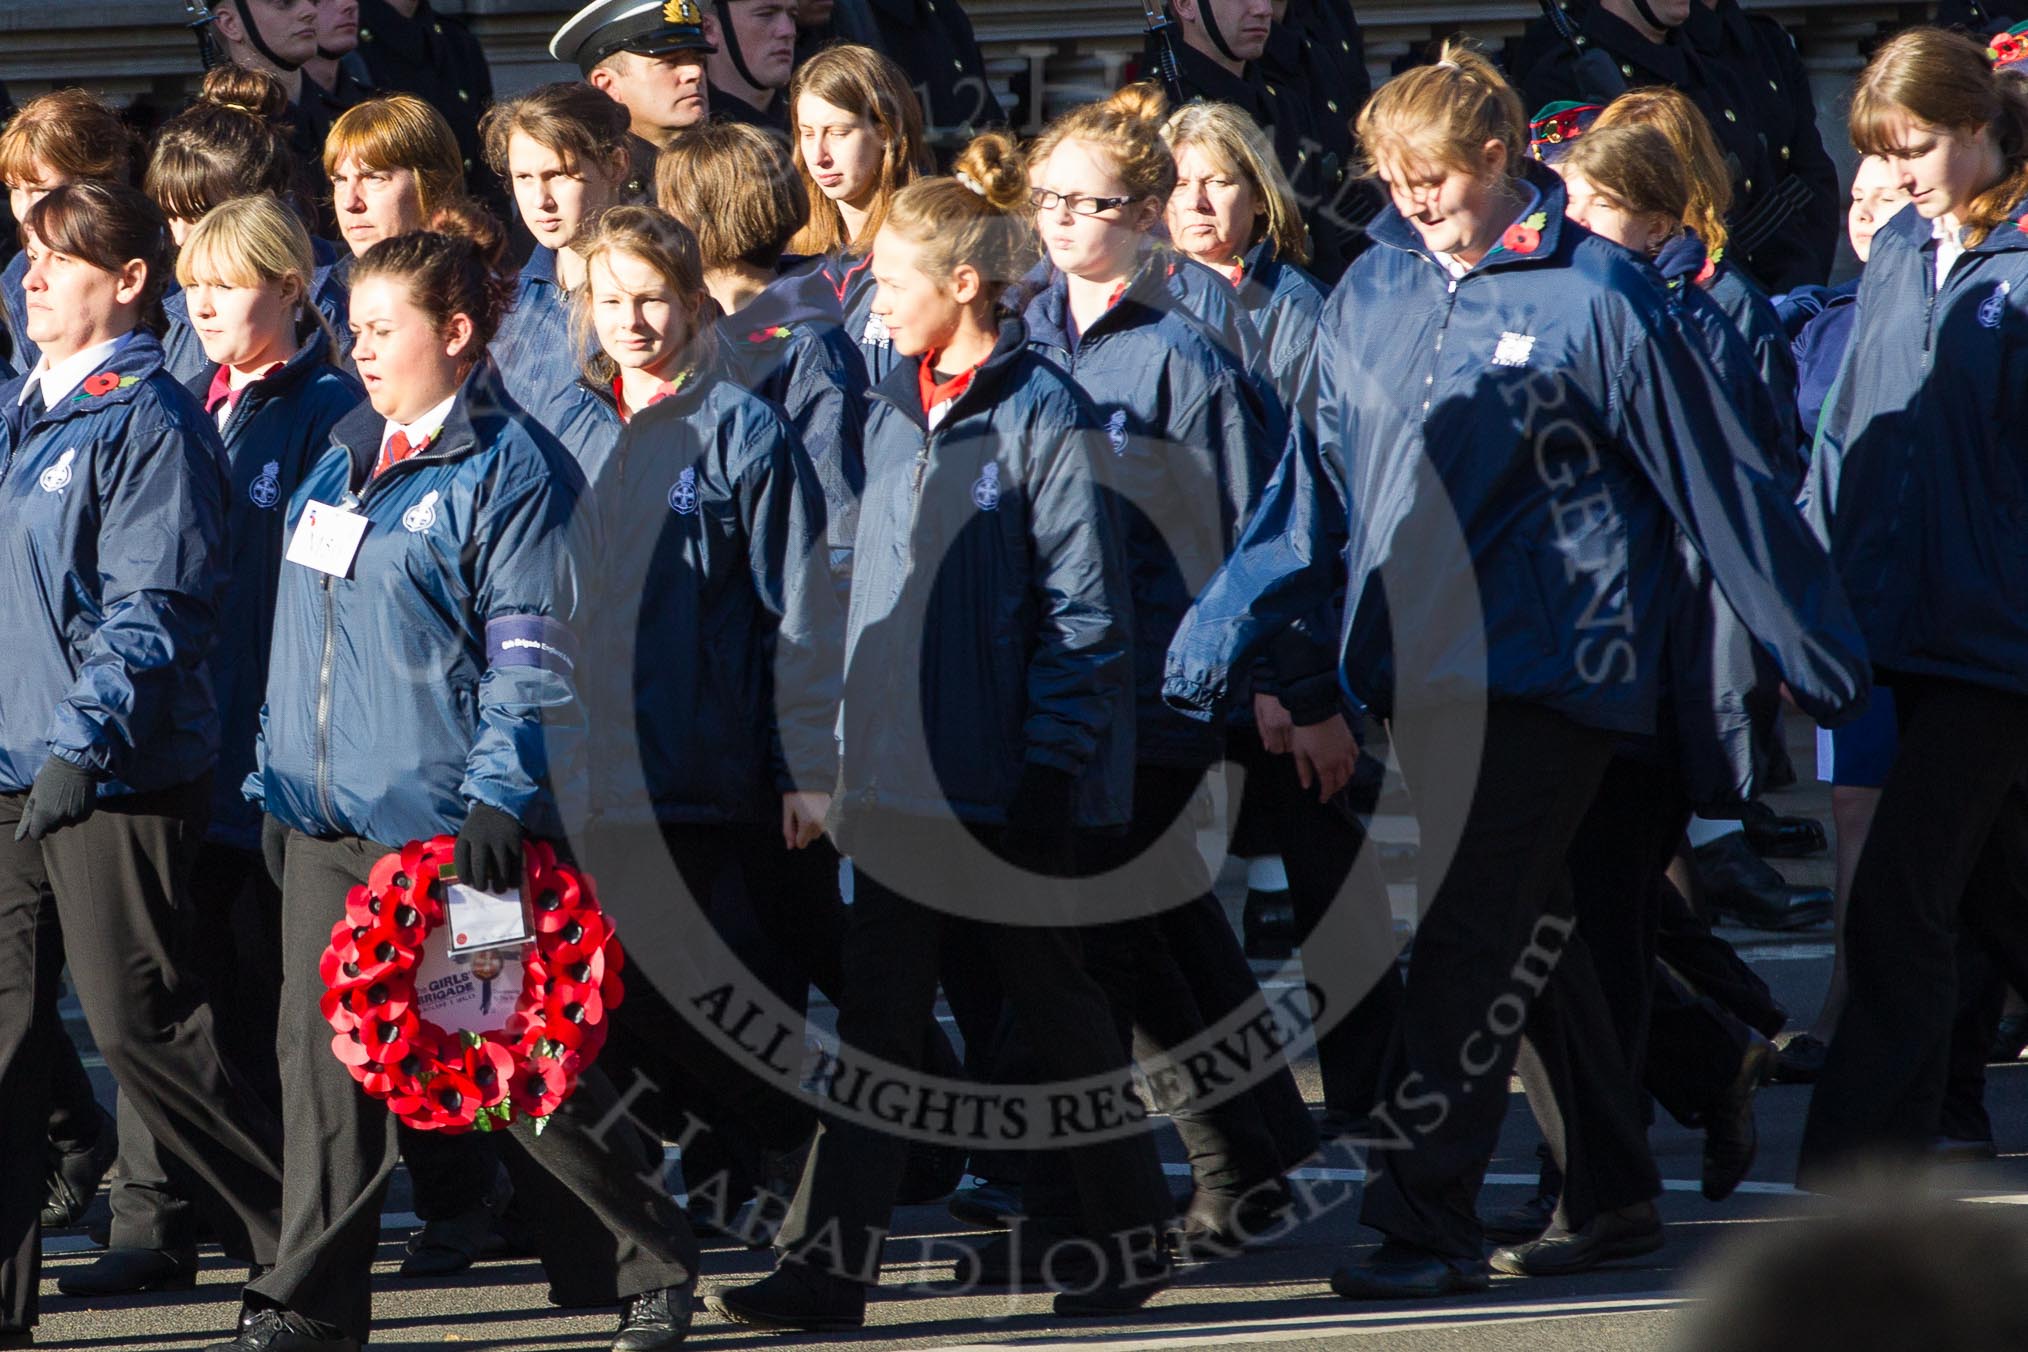 Remembrance Sunday 2012 Cenotaph March Past: Group M50 - Girls Brigade England & Wales..
Whitehall, Cenotaph,
London SW1,

United Kingdom,
on 11 November 2012 at 12:15, image #1731